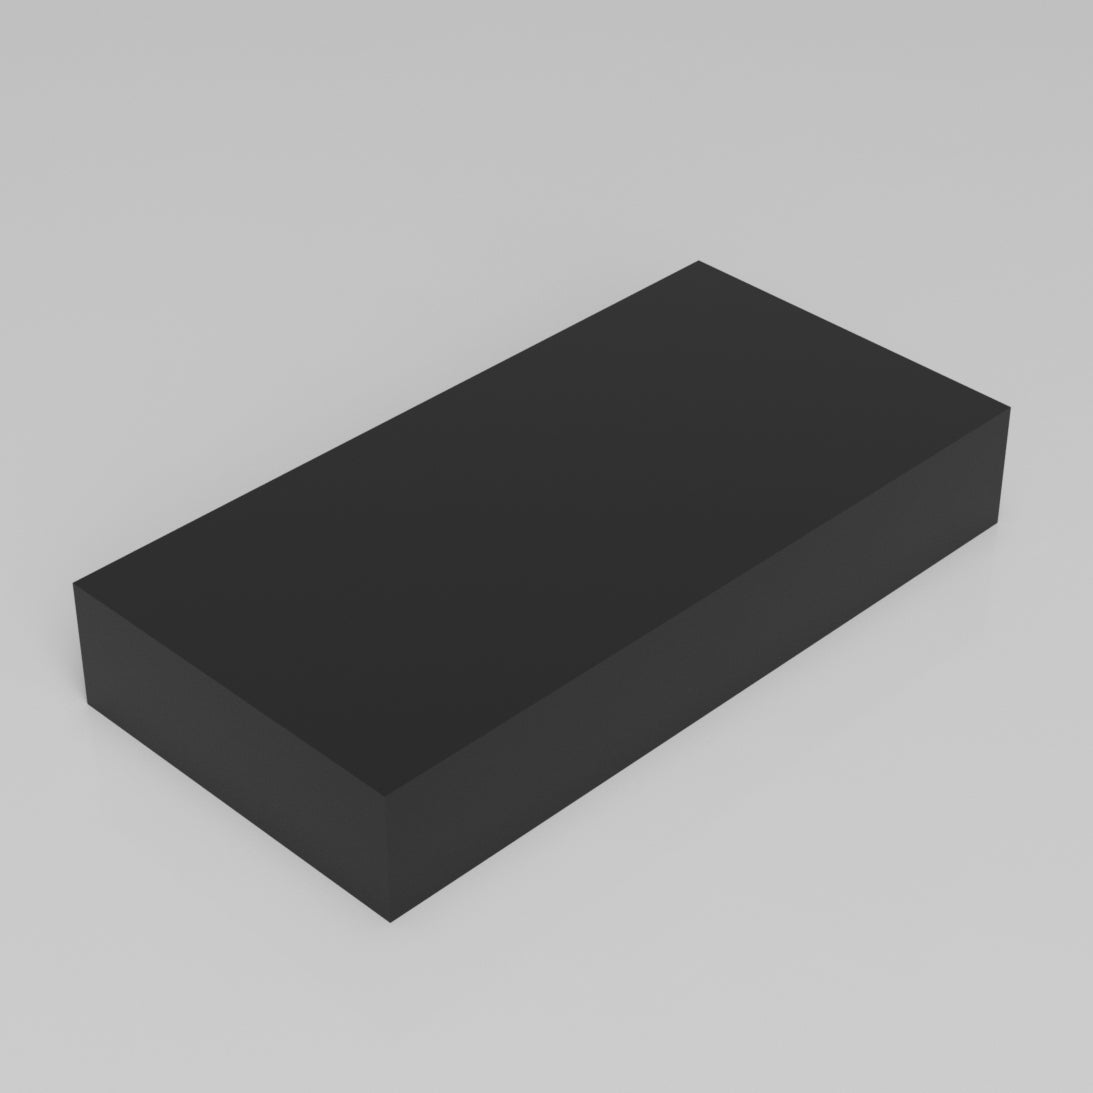 Machinable Wax Rectangular Block Front View 2 Inch by 6 Inch by 12 Inch